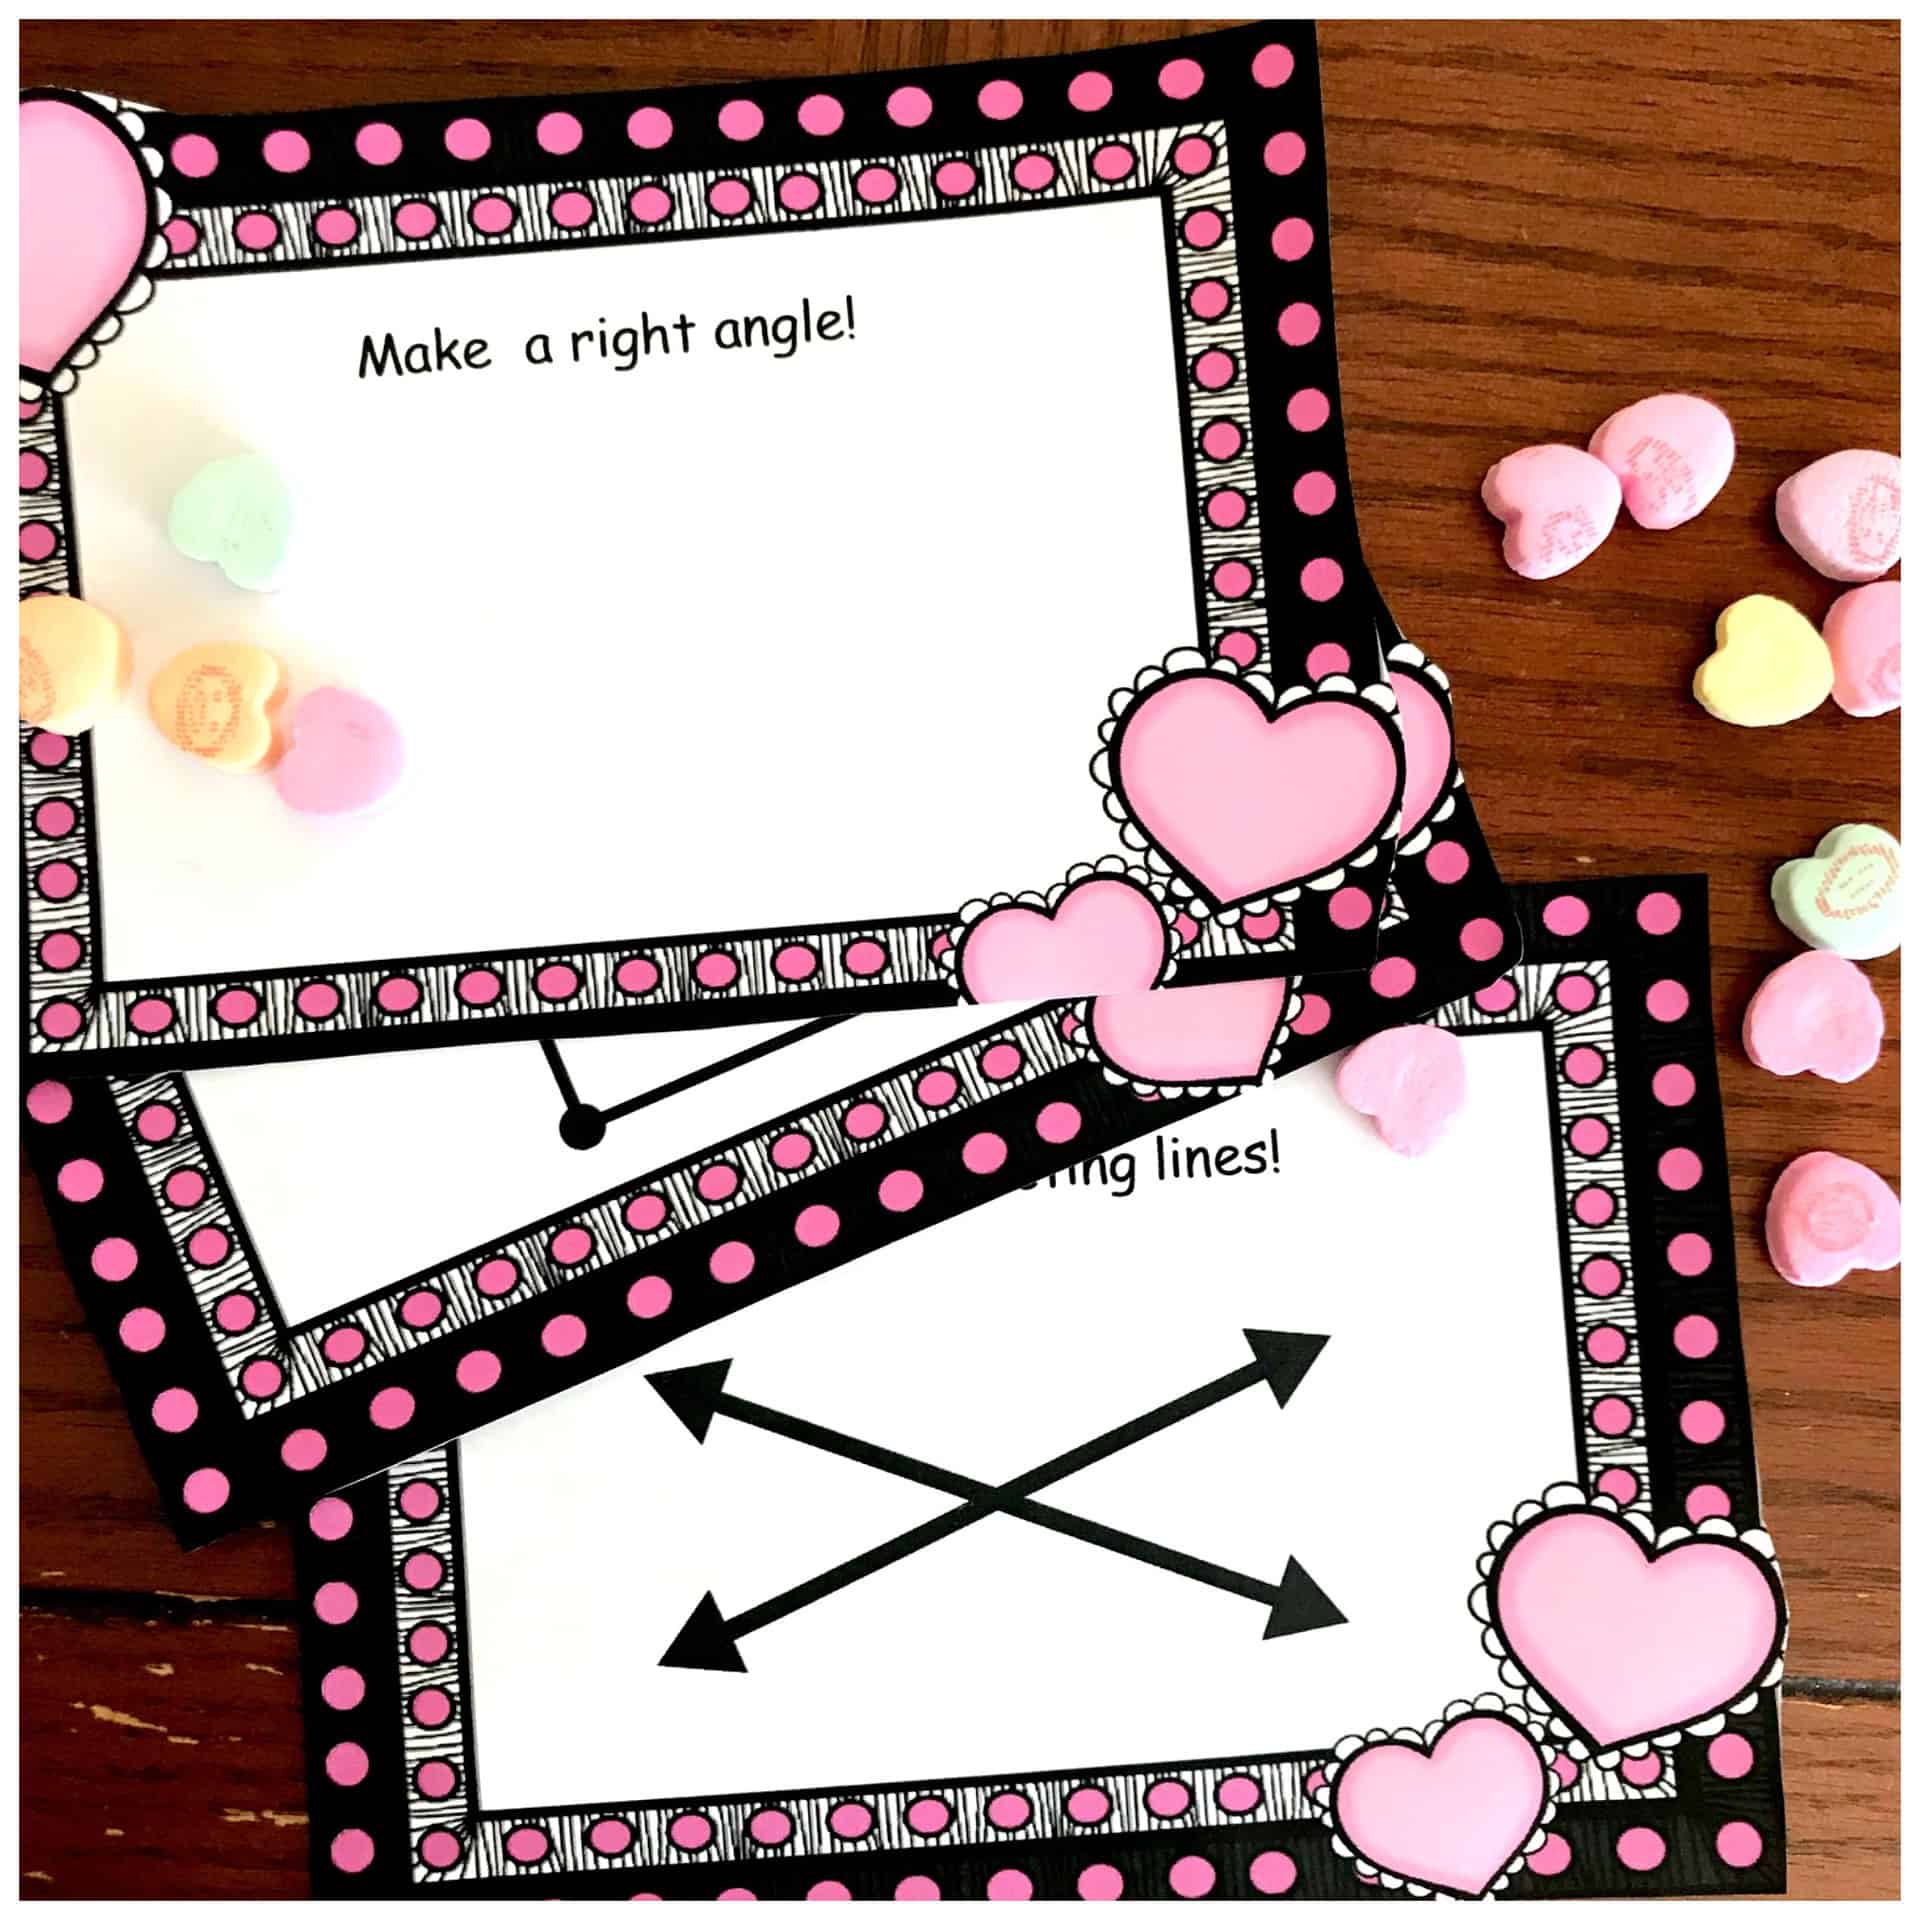 These Lines and Angles Worksheets Get Children Building Right Angles And More